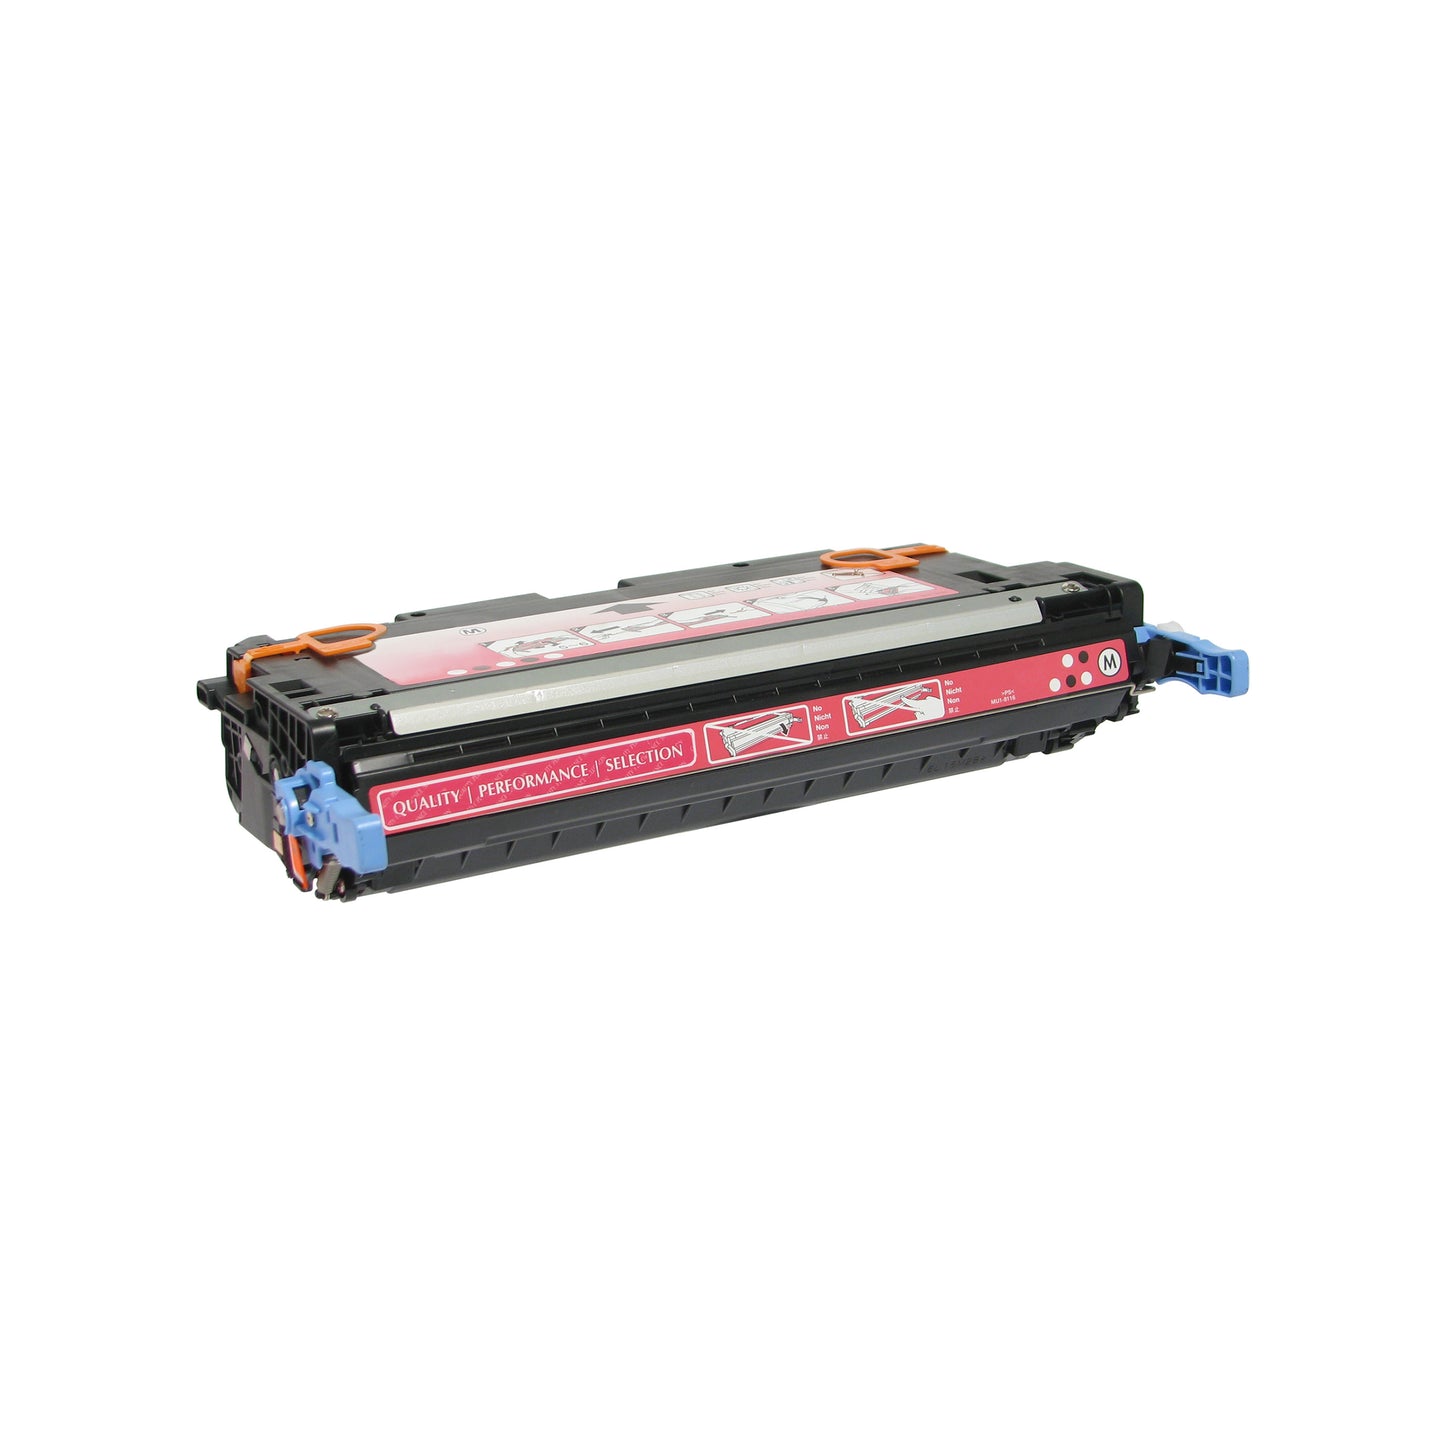 HP 314A (Q7563A) Magenta Remanufactured Toner Cartridge [3,500 pages]